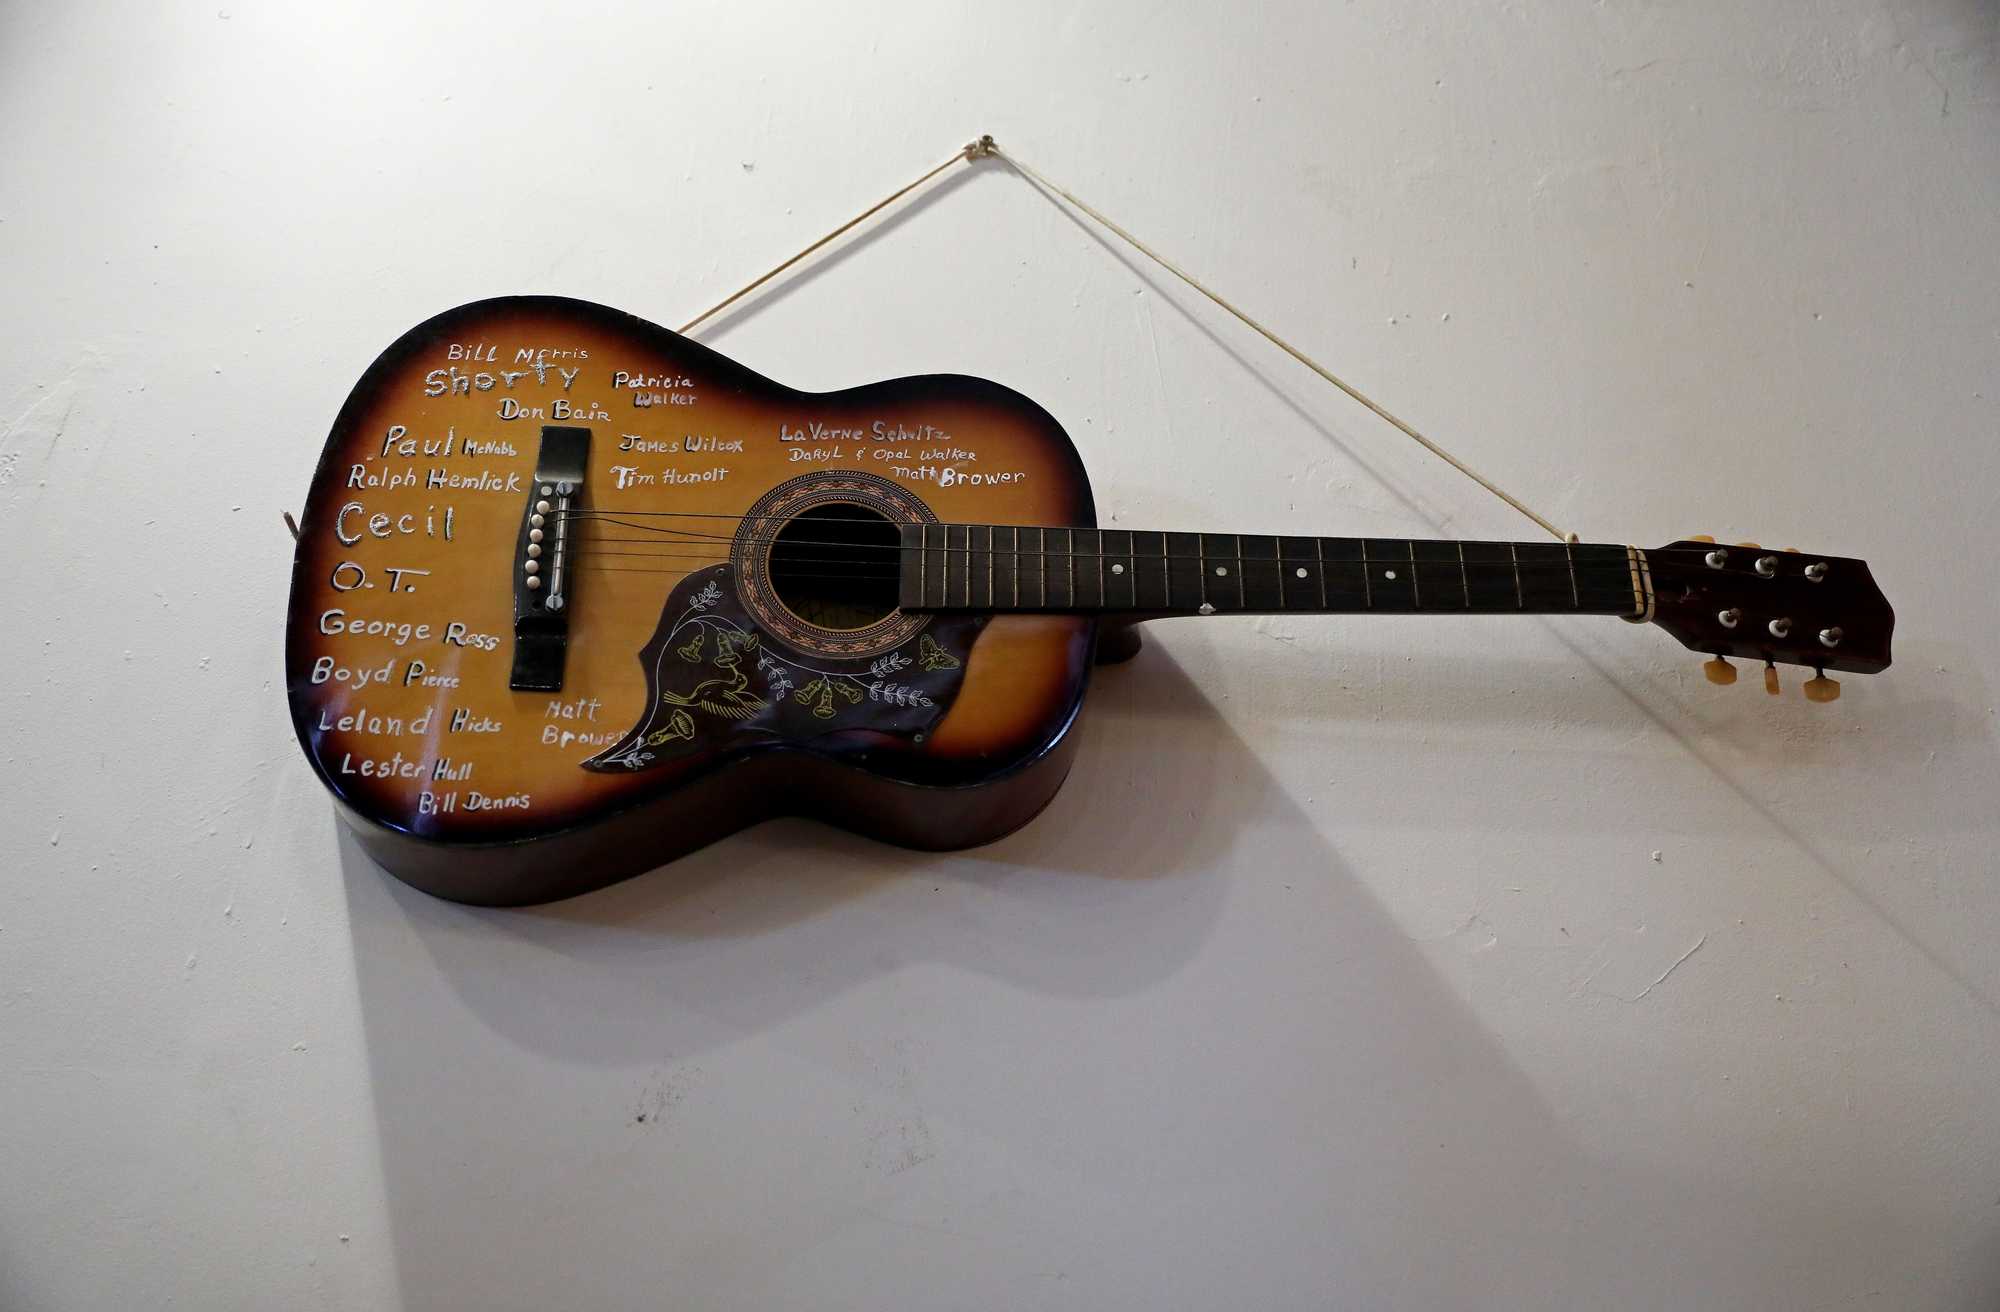 This acoustic guitar hanging at the What Cheer Opera House is marked with the names of performers who have strummed it. 